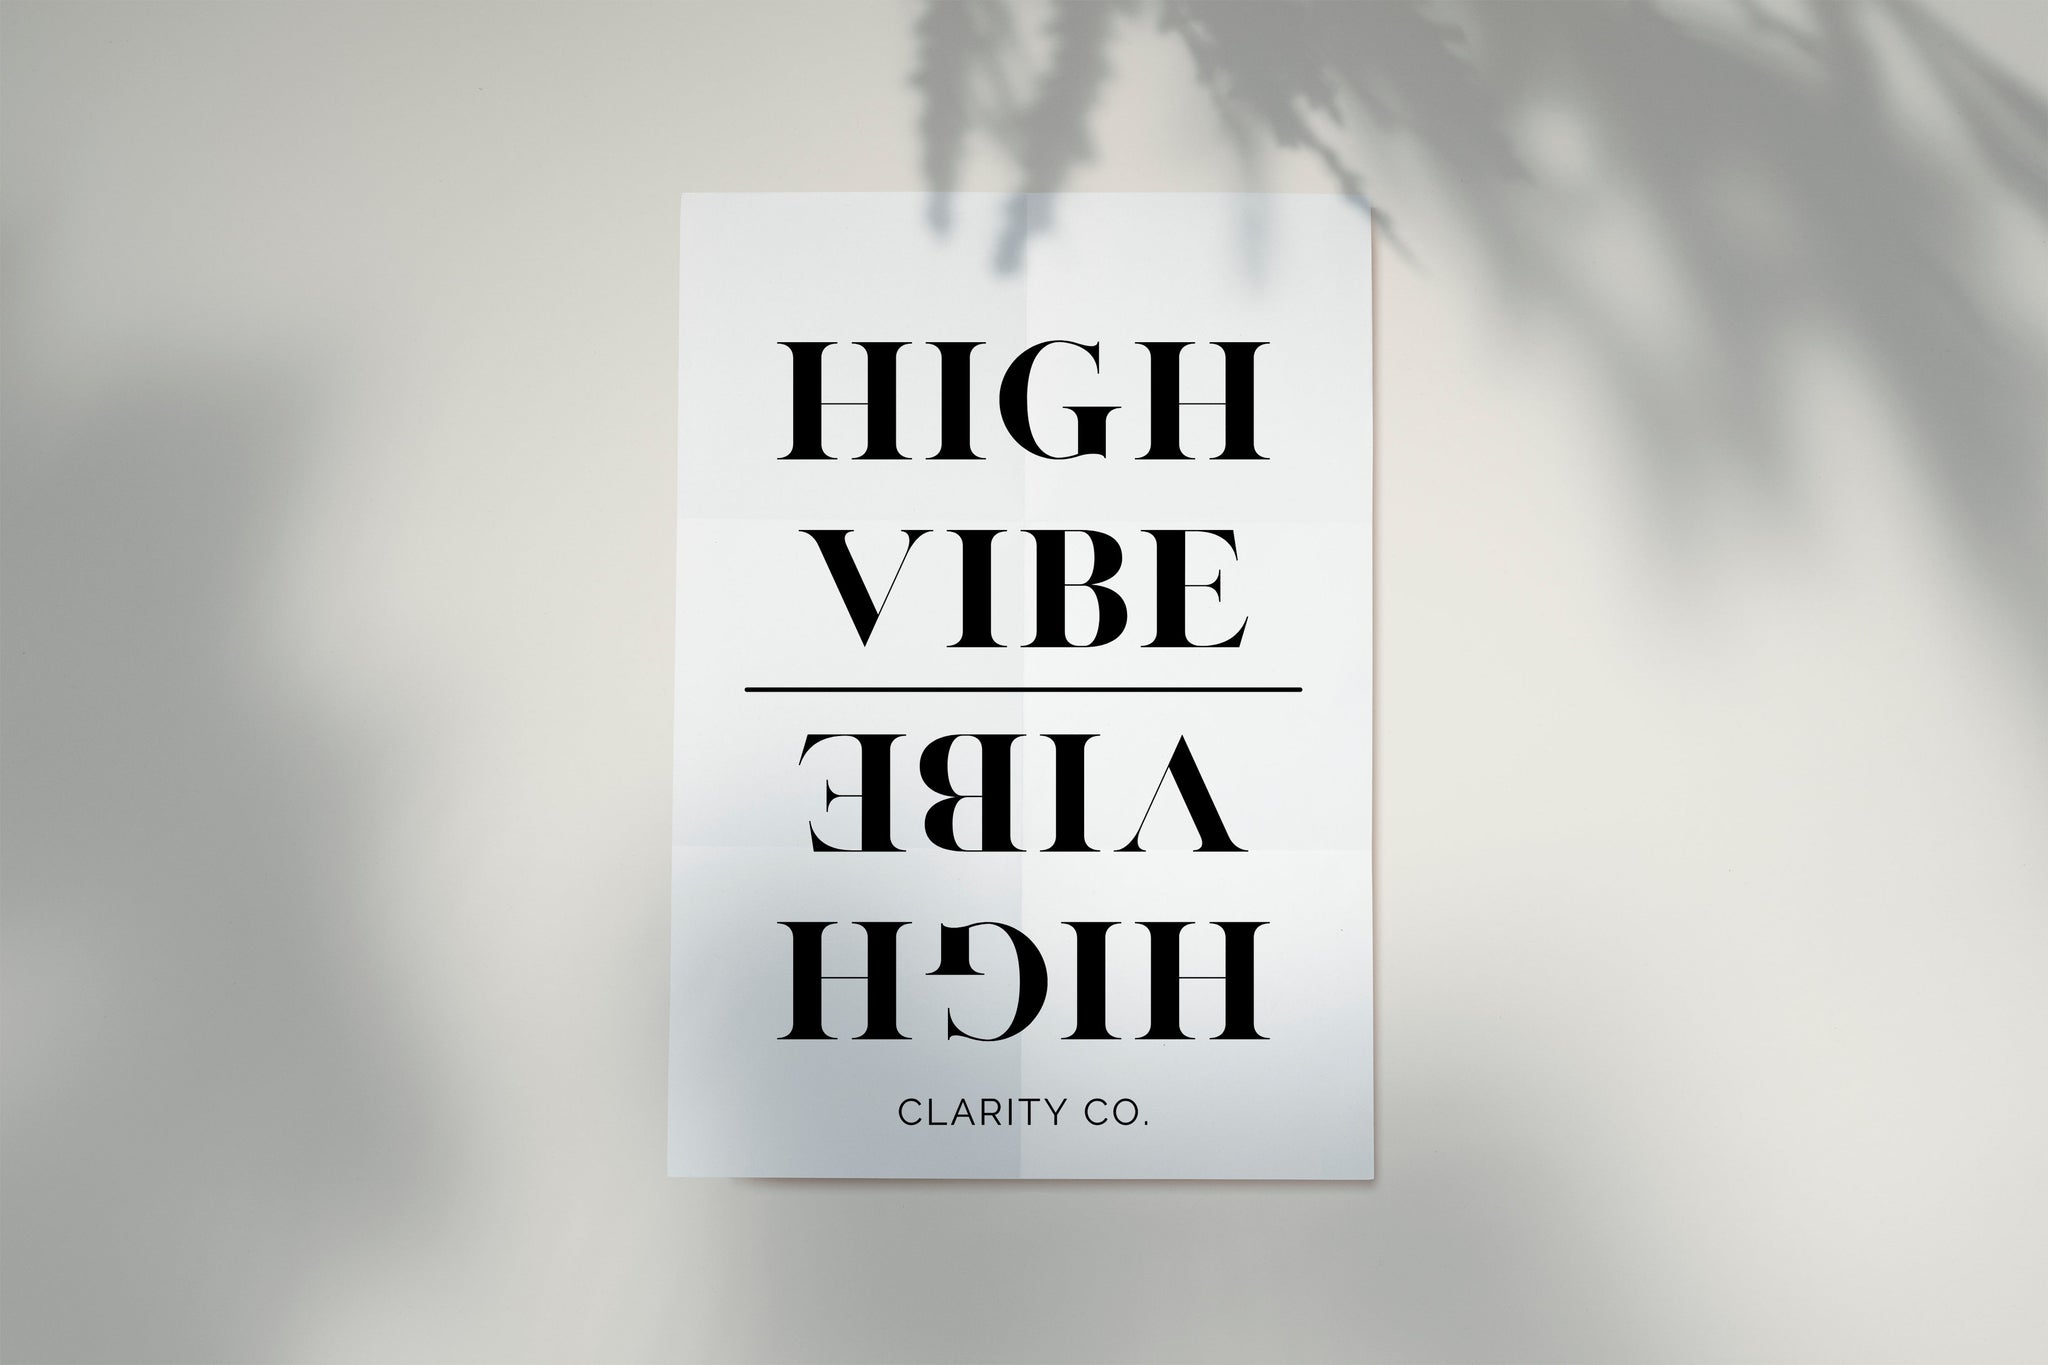 High Vibe - Clarity Co. Designs (Digital Download) - Premium Crystals + Gifts from Clarity Co. - NZ's Favourite Online Crystal Shop